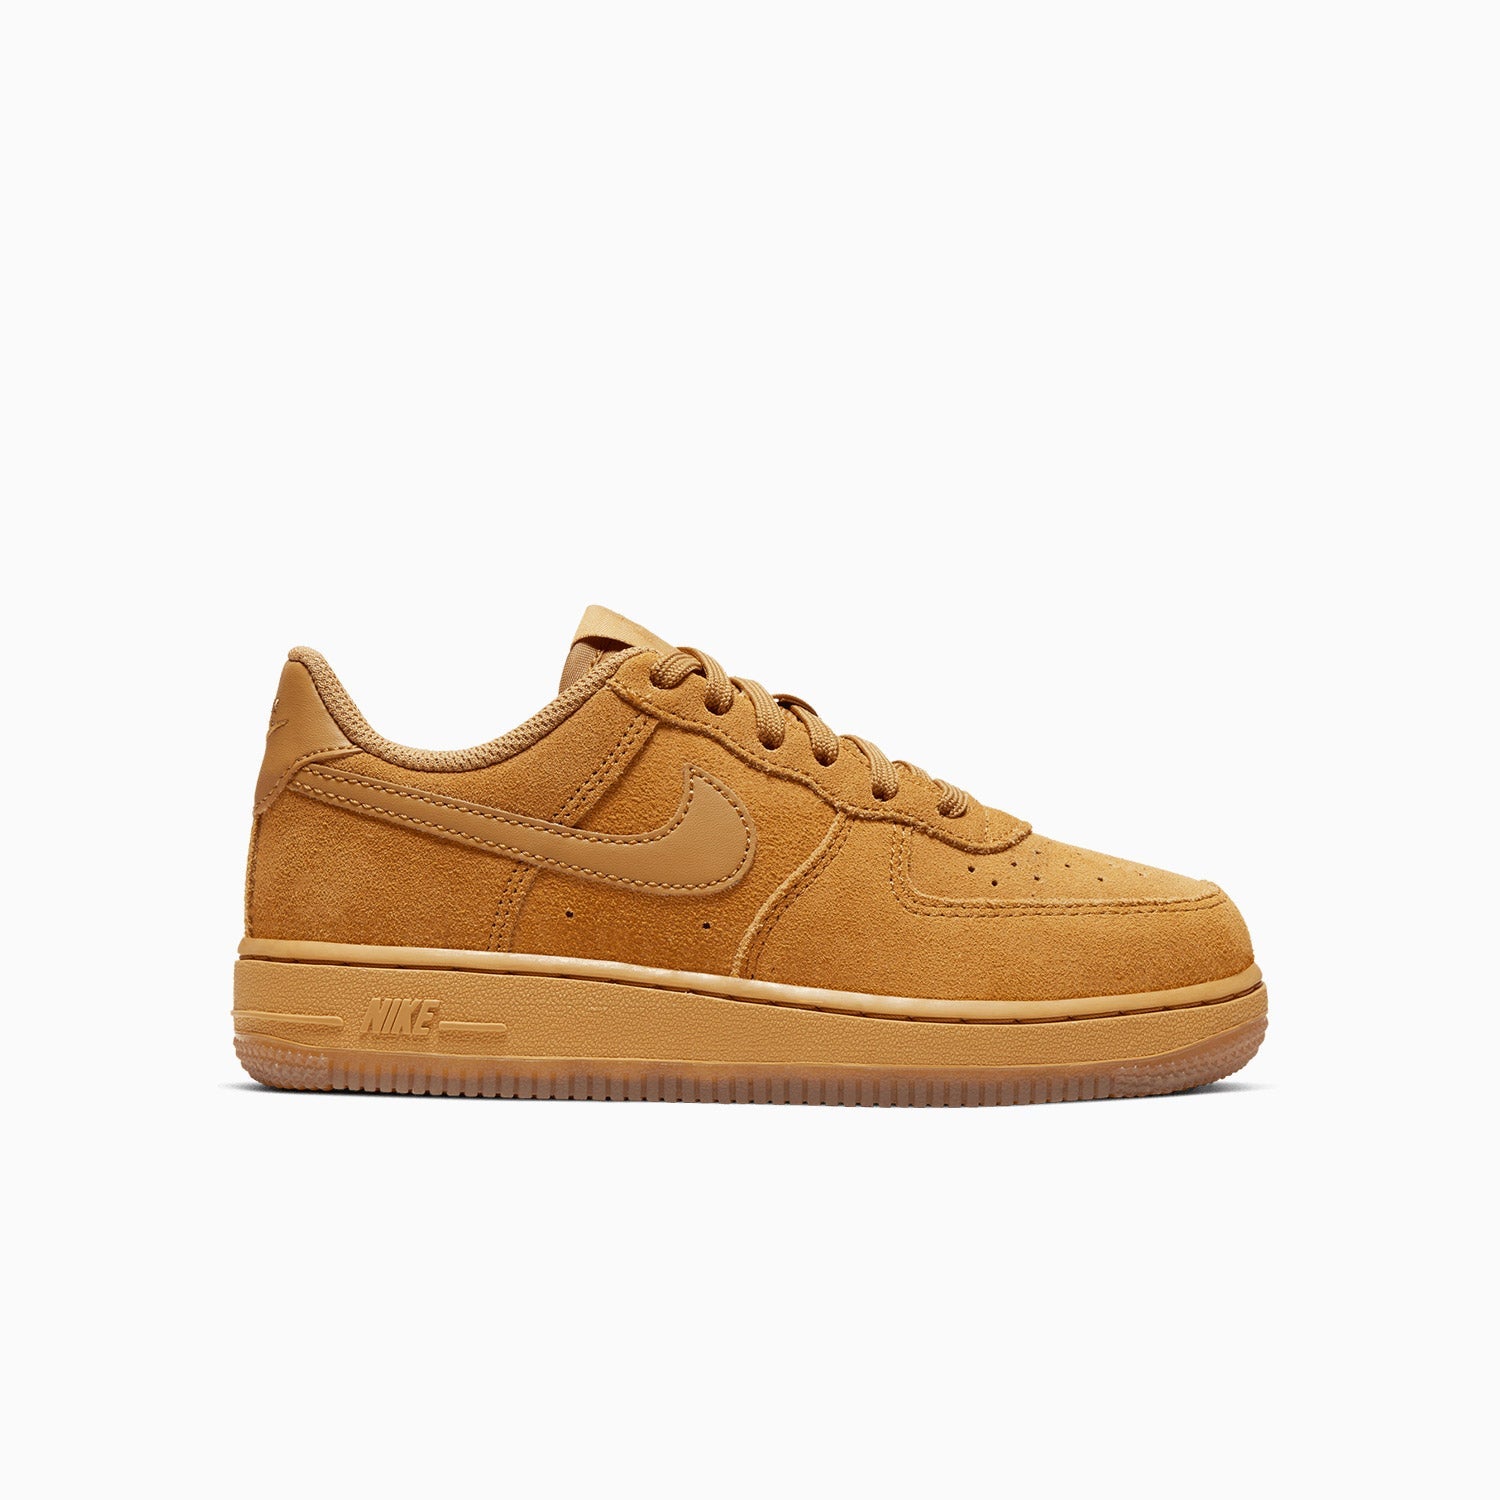 Kid's Nike Air Force 1 LV8 3 "Wheat" Preschool - Color: Wheat Light Brown - Tops and Bottoms USA -